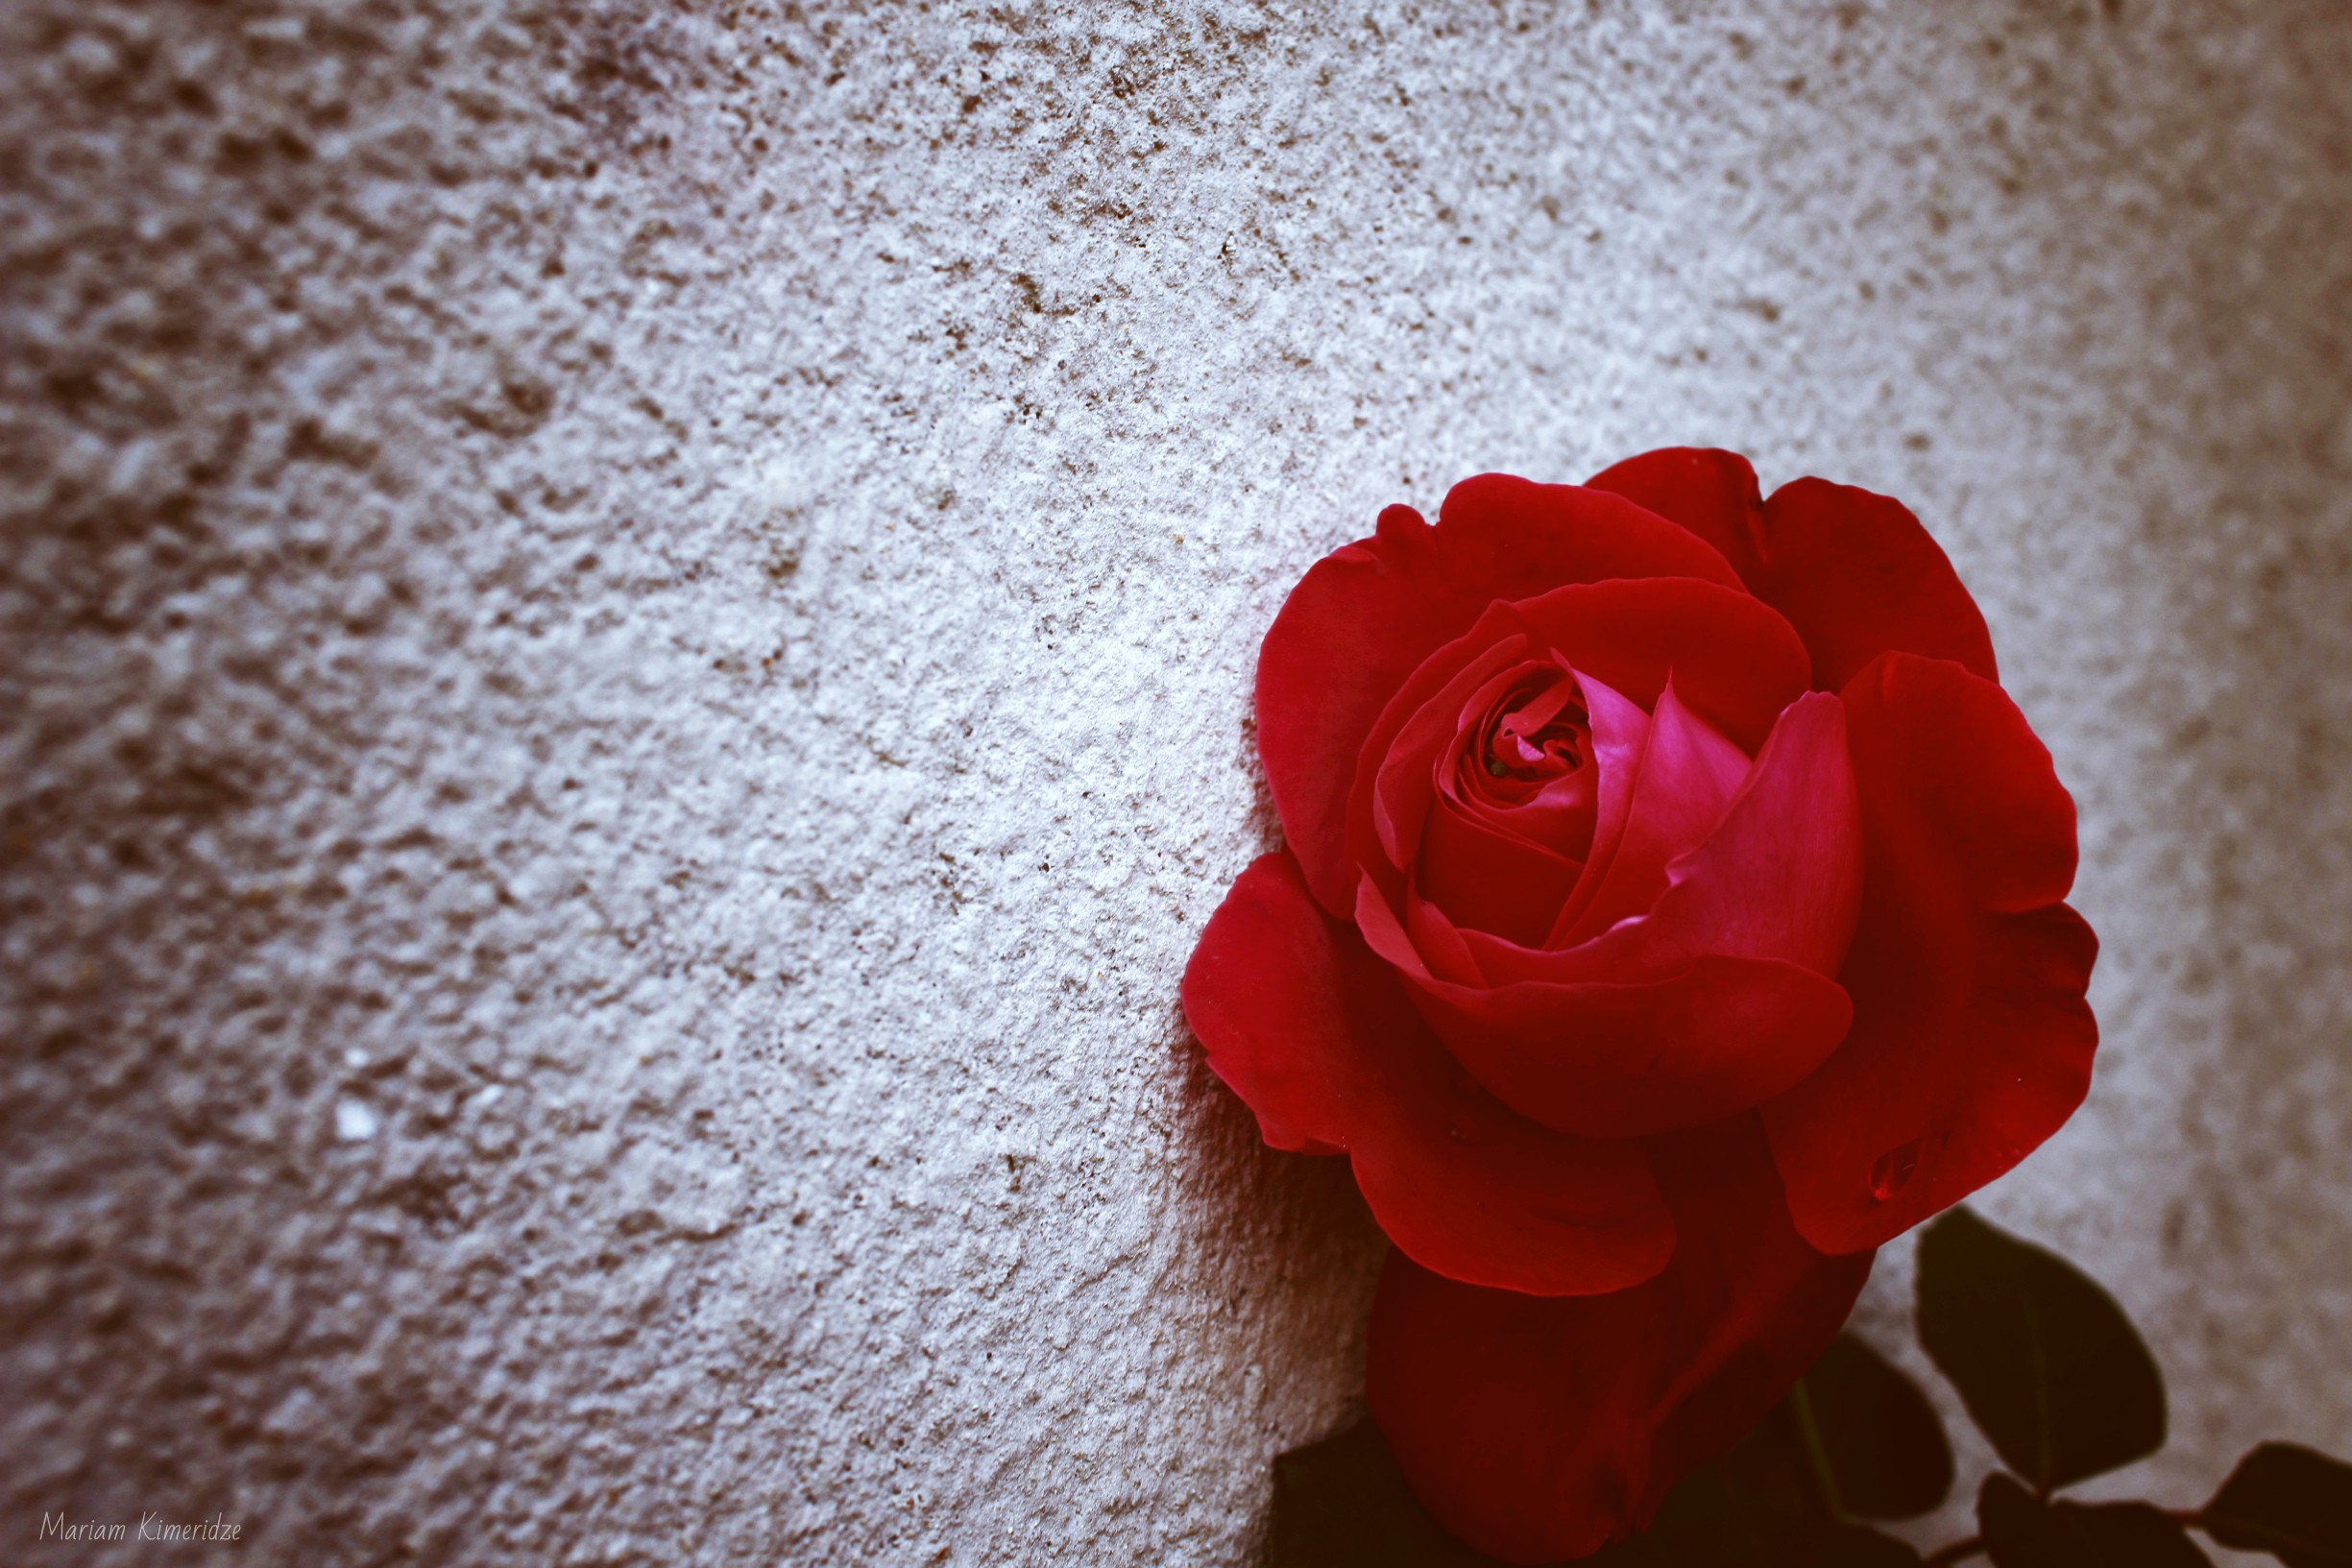 Wallpapers nature red rose on the desktop